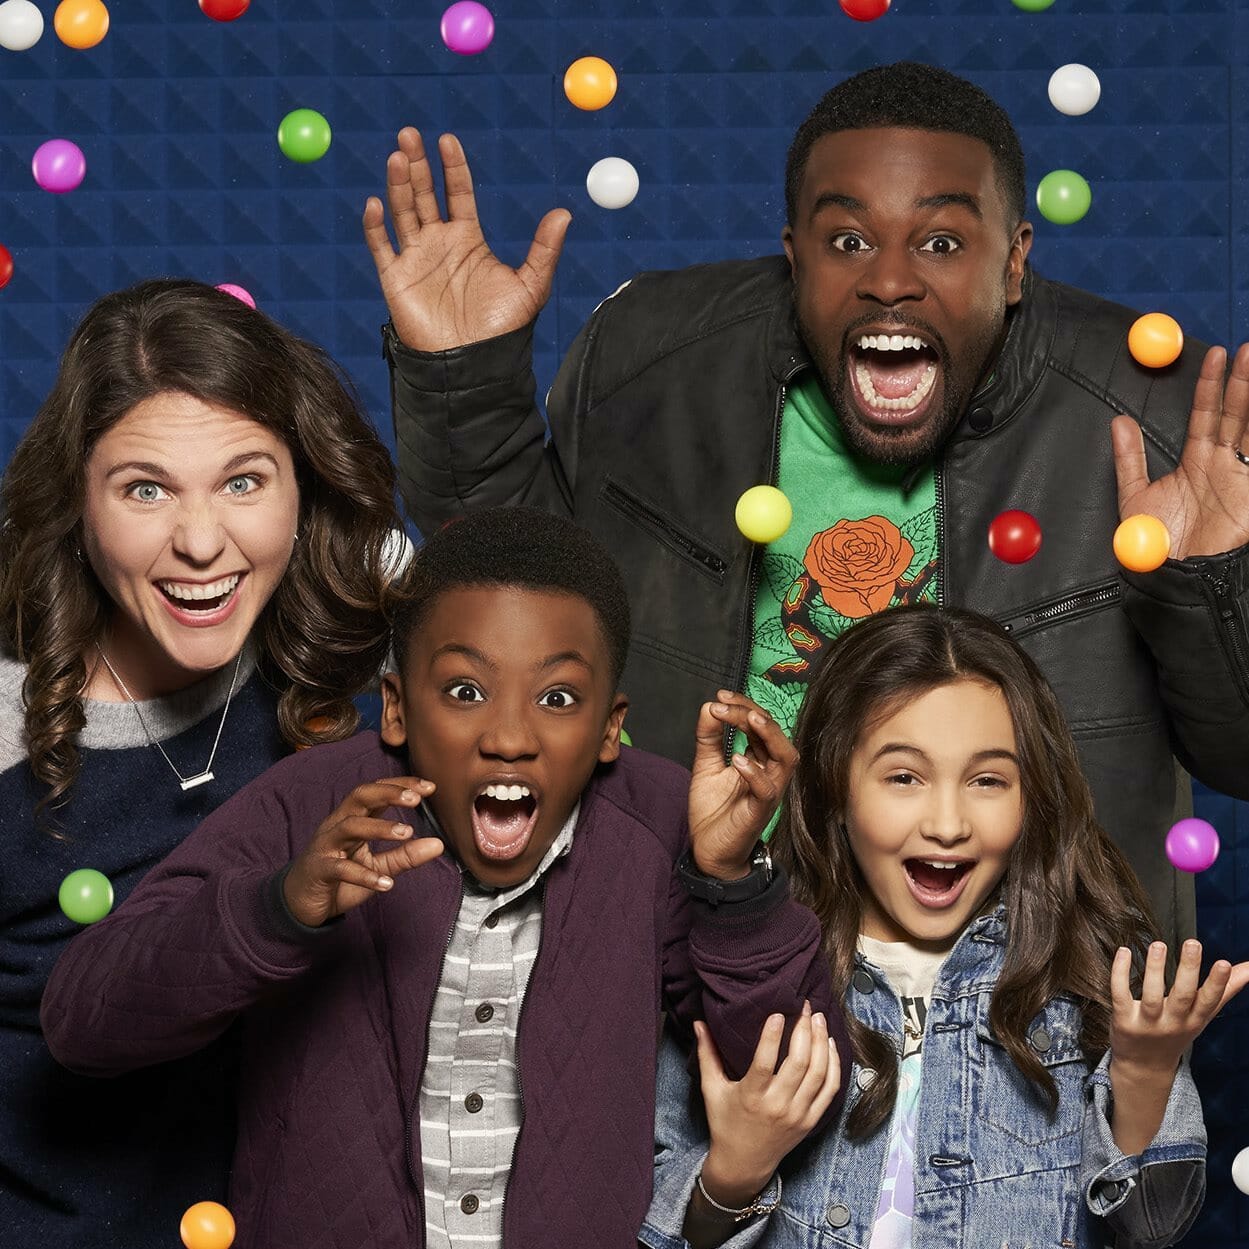 Nickelodeon’s All That Revival and Disney’s Just Roll With It Prove the (Funny) Kids are Alright